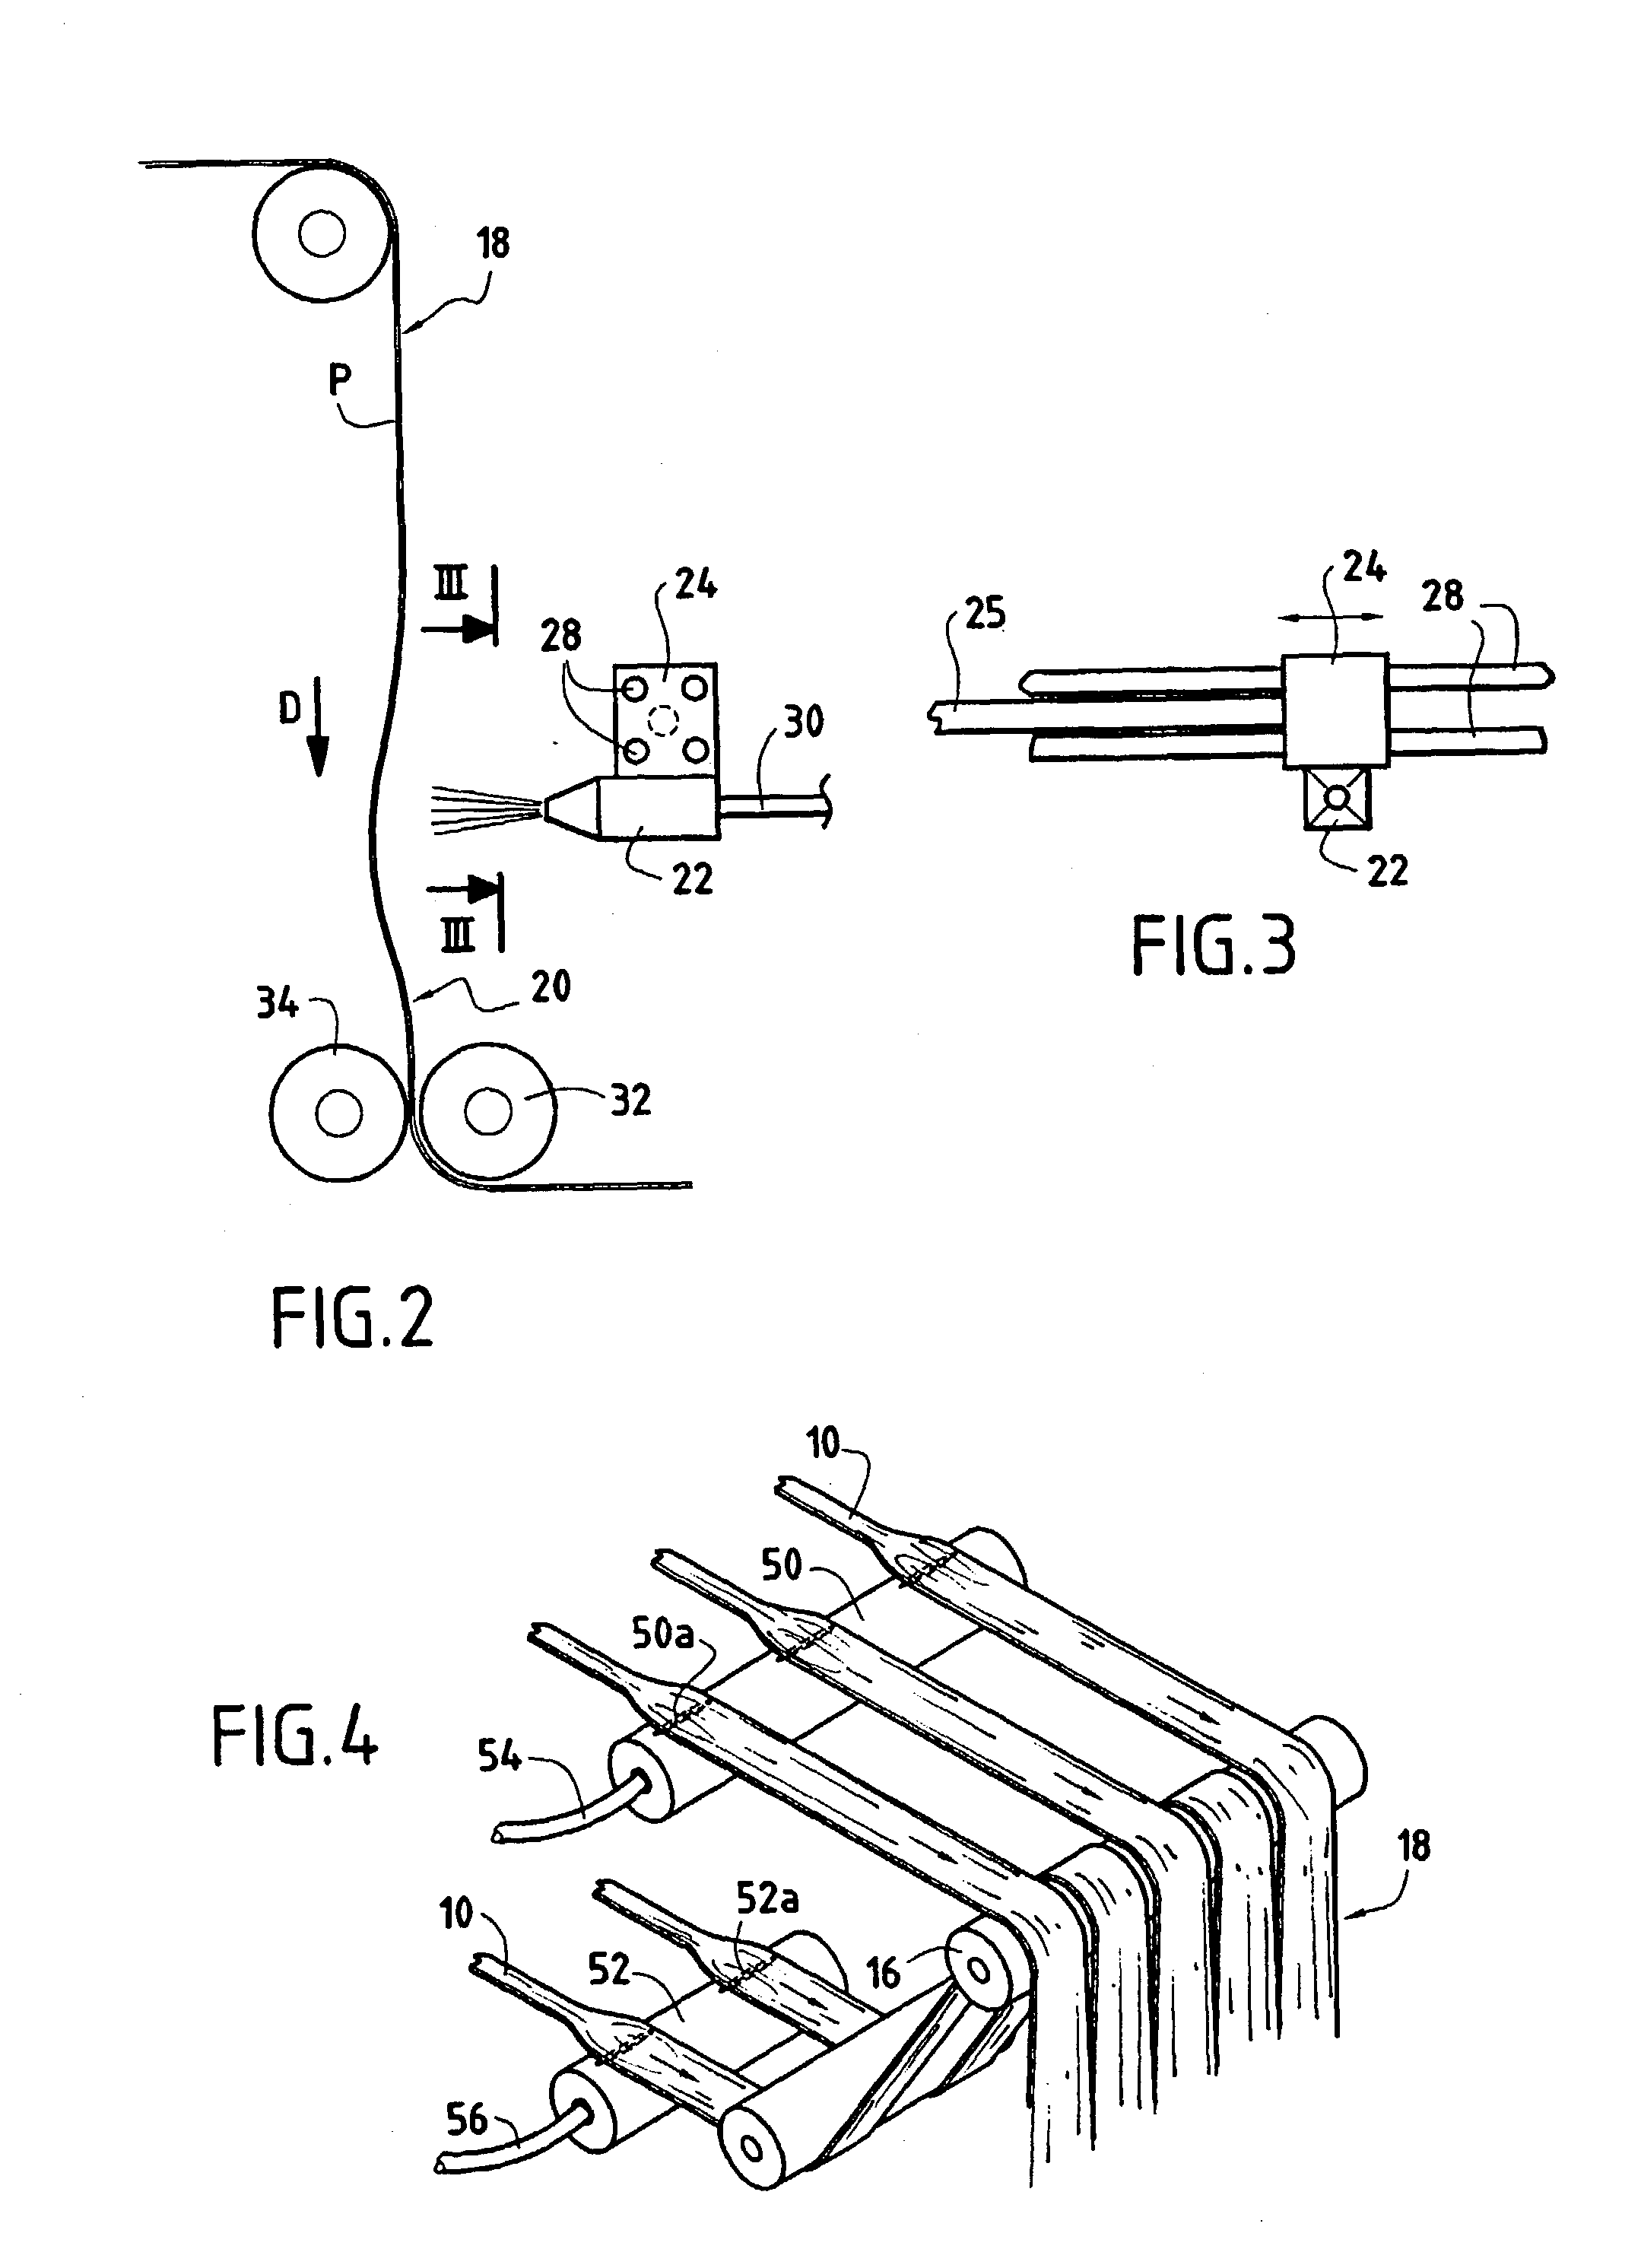 Method and device for producing a textile web by spreading tows